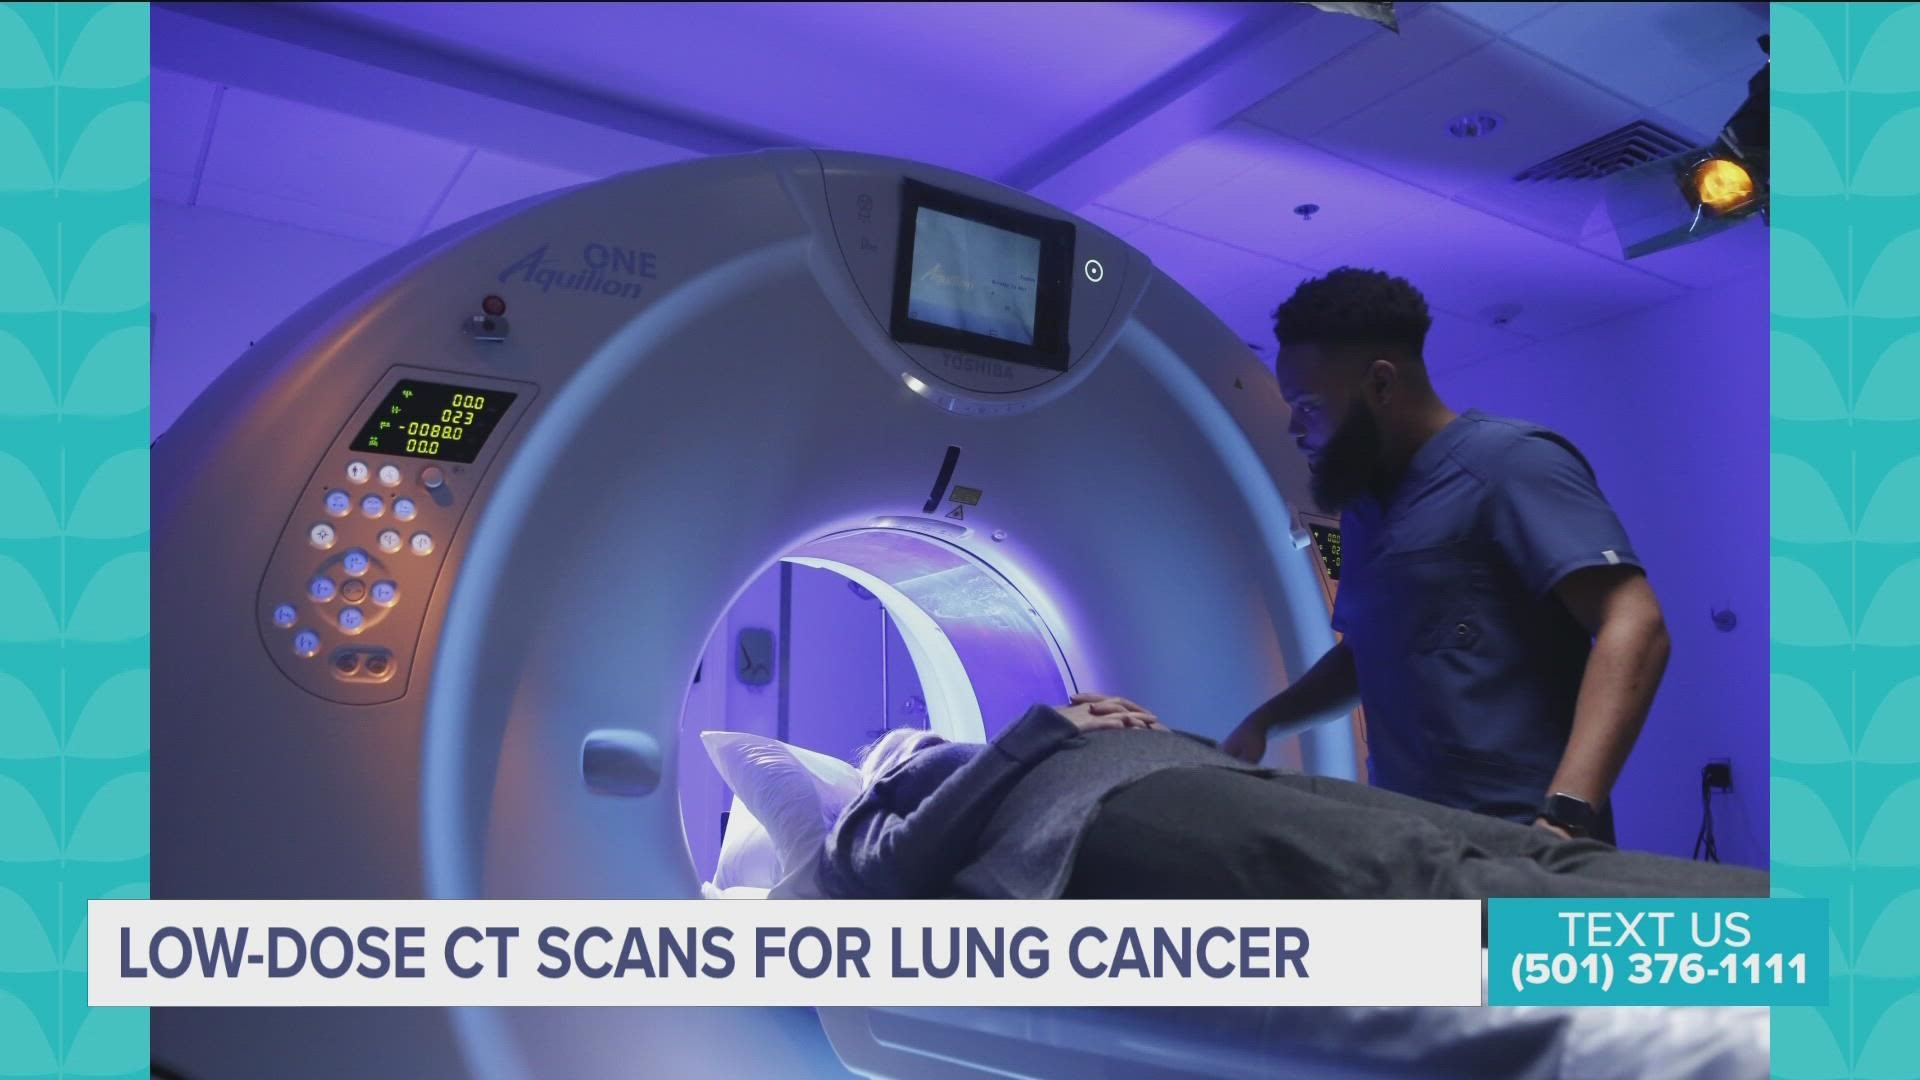 How to Detect Lung Cancer: Early detection and more